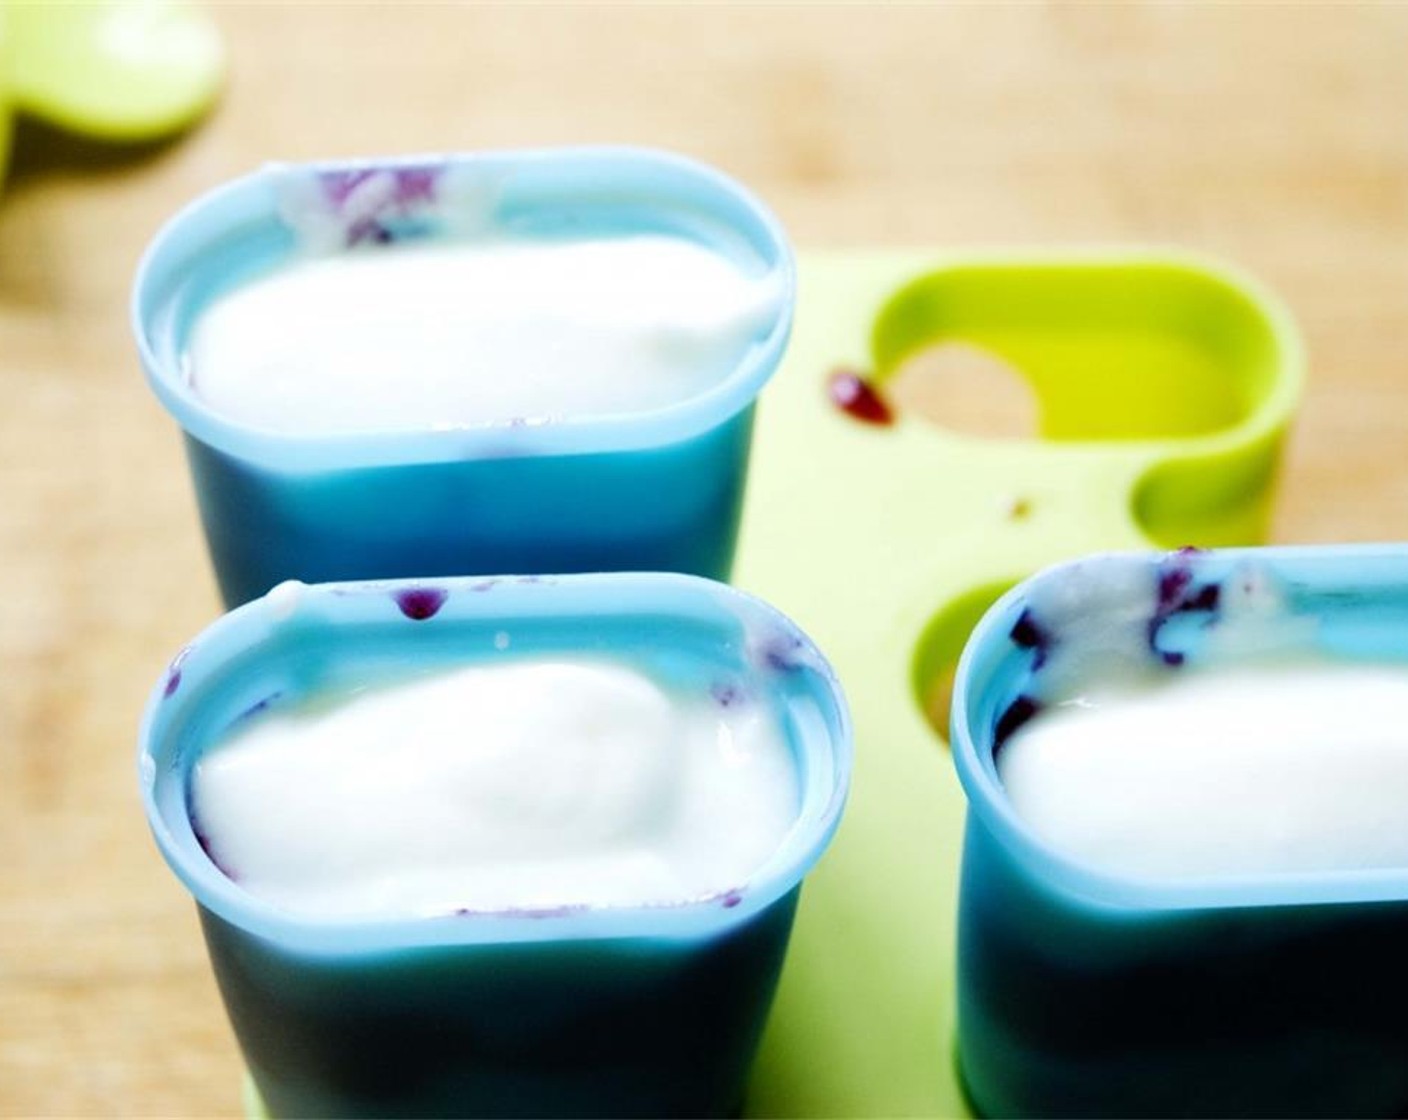 step 5 Finish up with one last tablespoon of yogurt. Then close them and put them in the freezer for at least 3-4 hours.